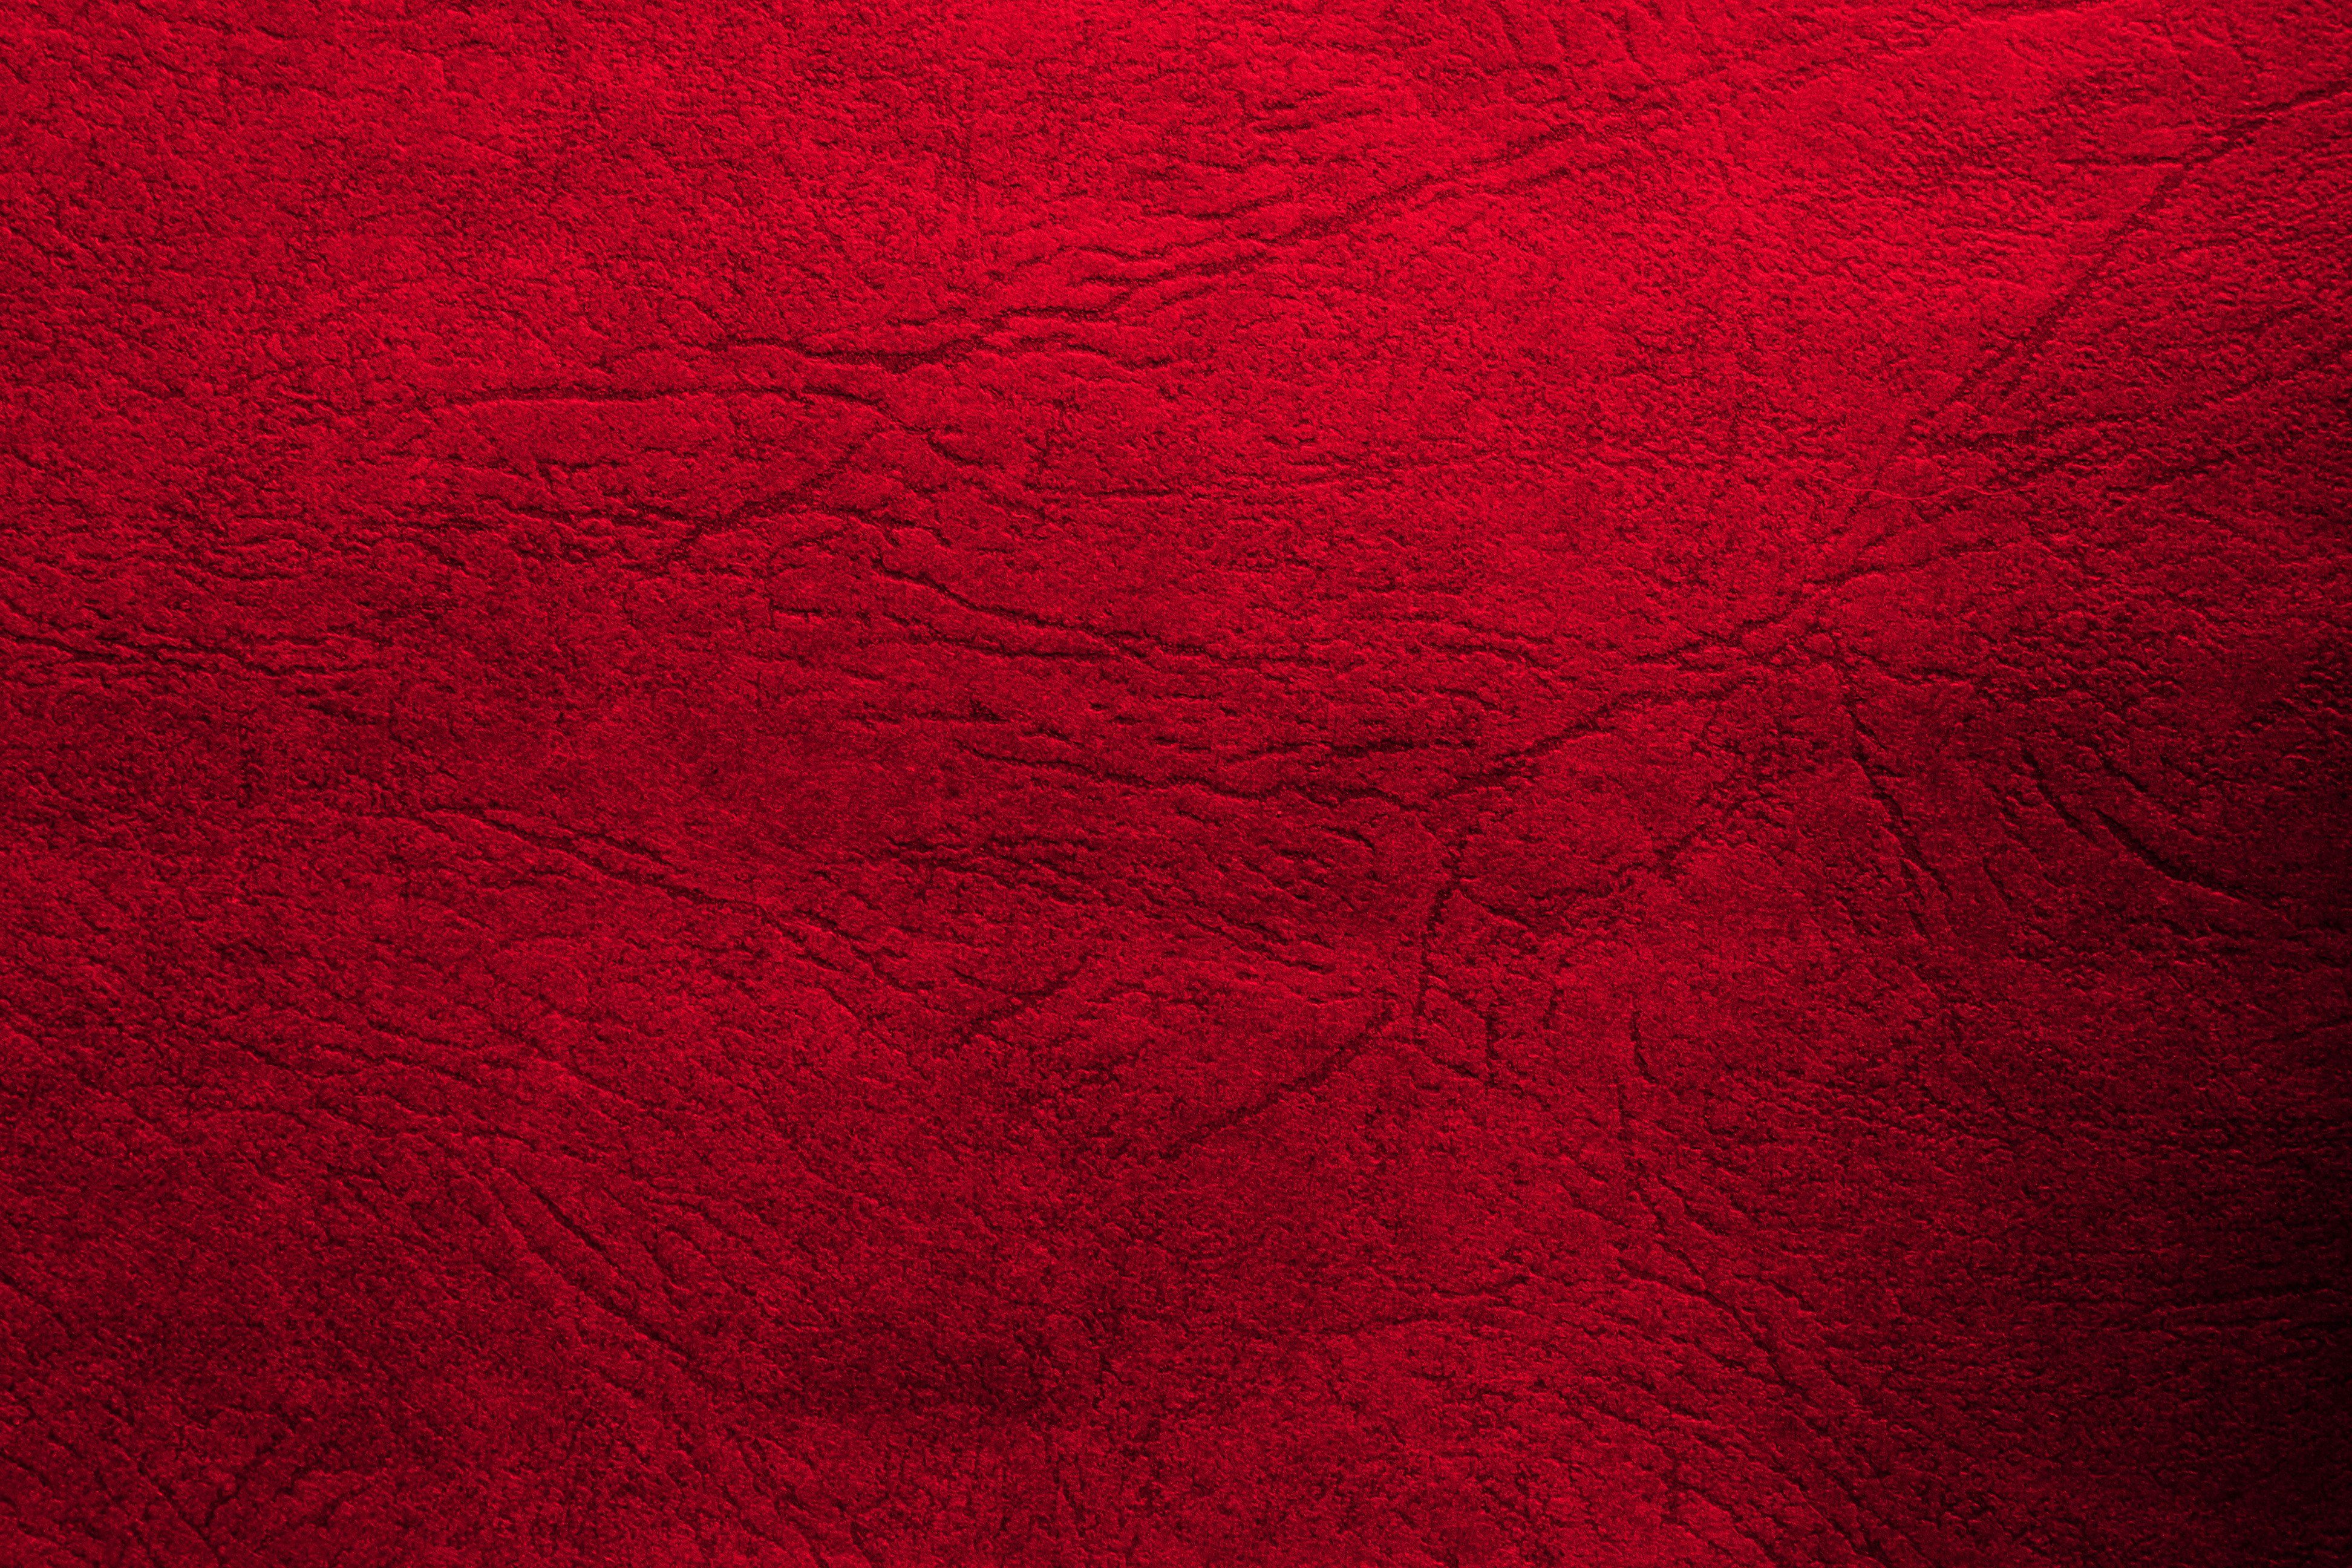 red textured wallpaper,red,maroon,textile,magenta,carmine